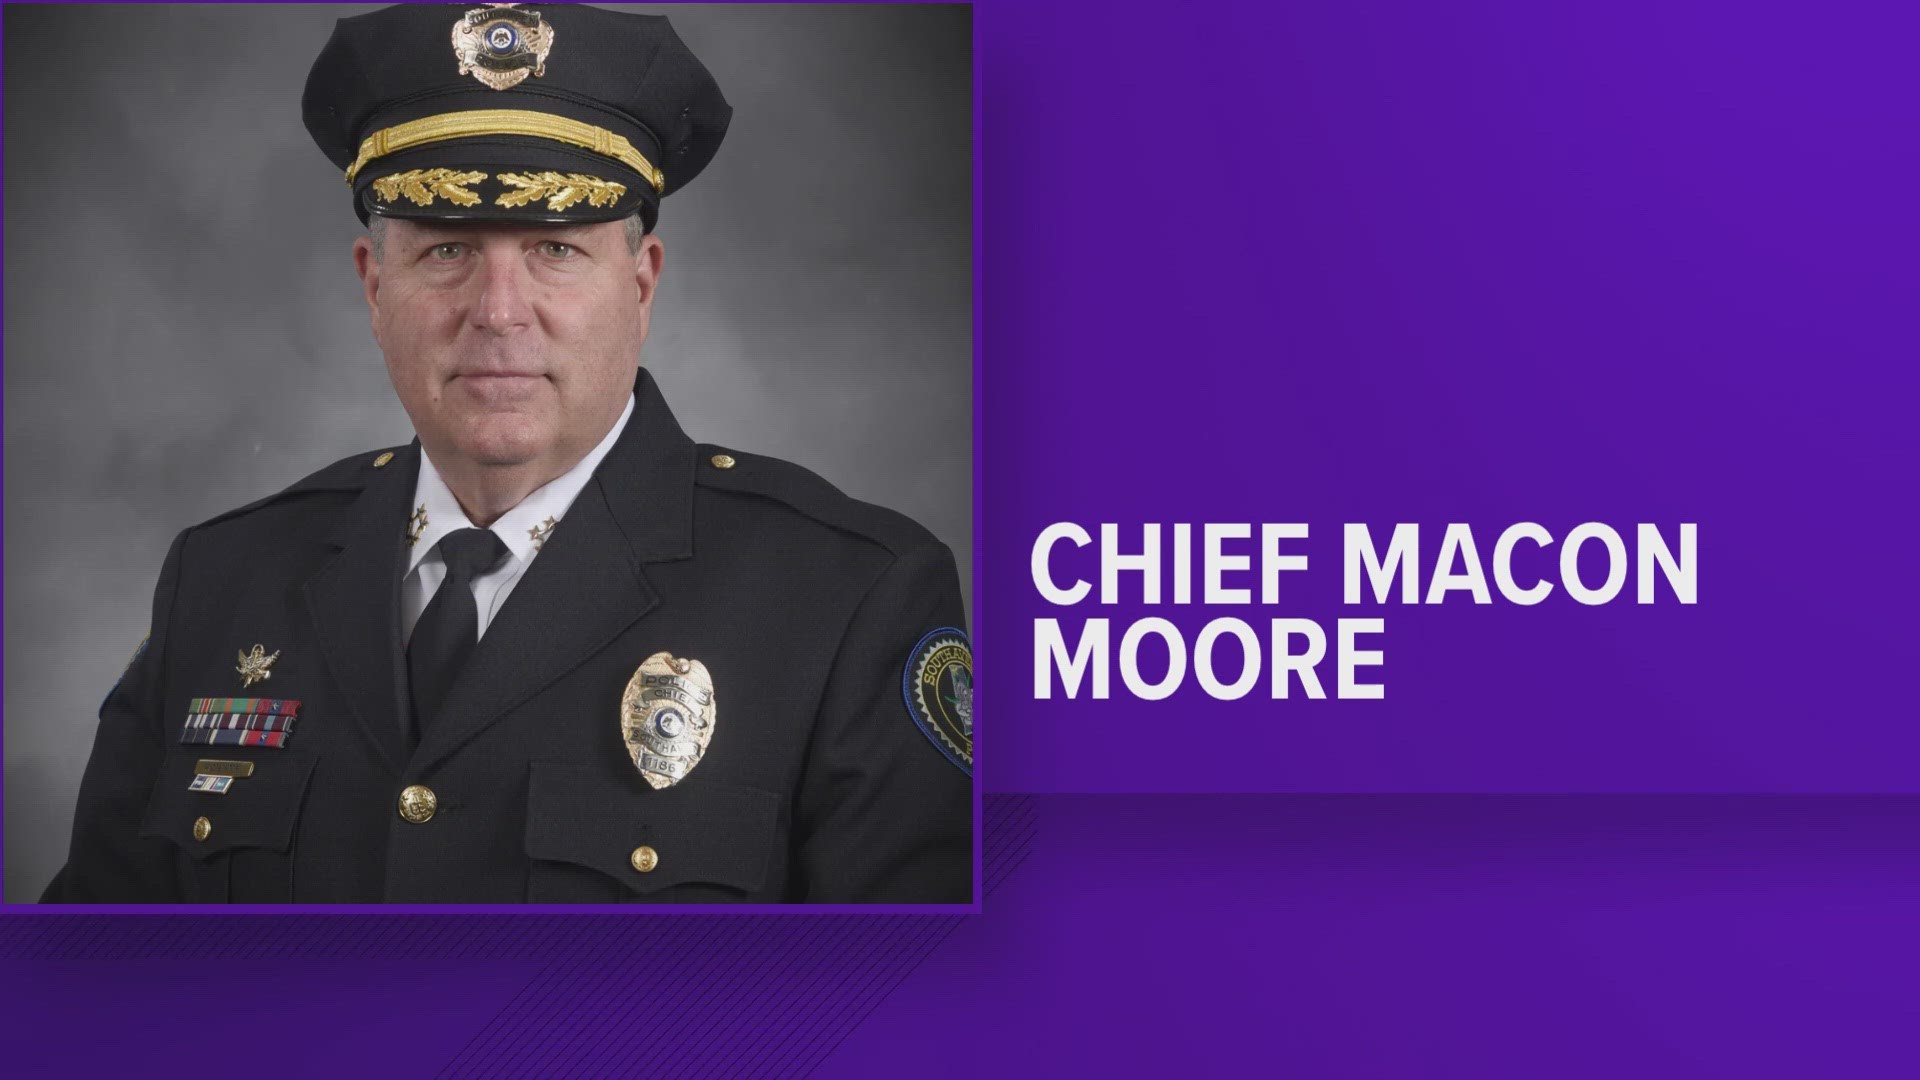 Chief Macon Moore announced he's retiring at the end of January.